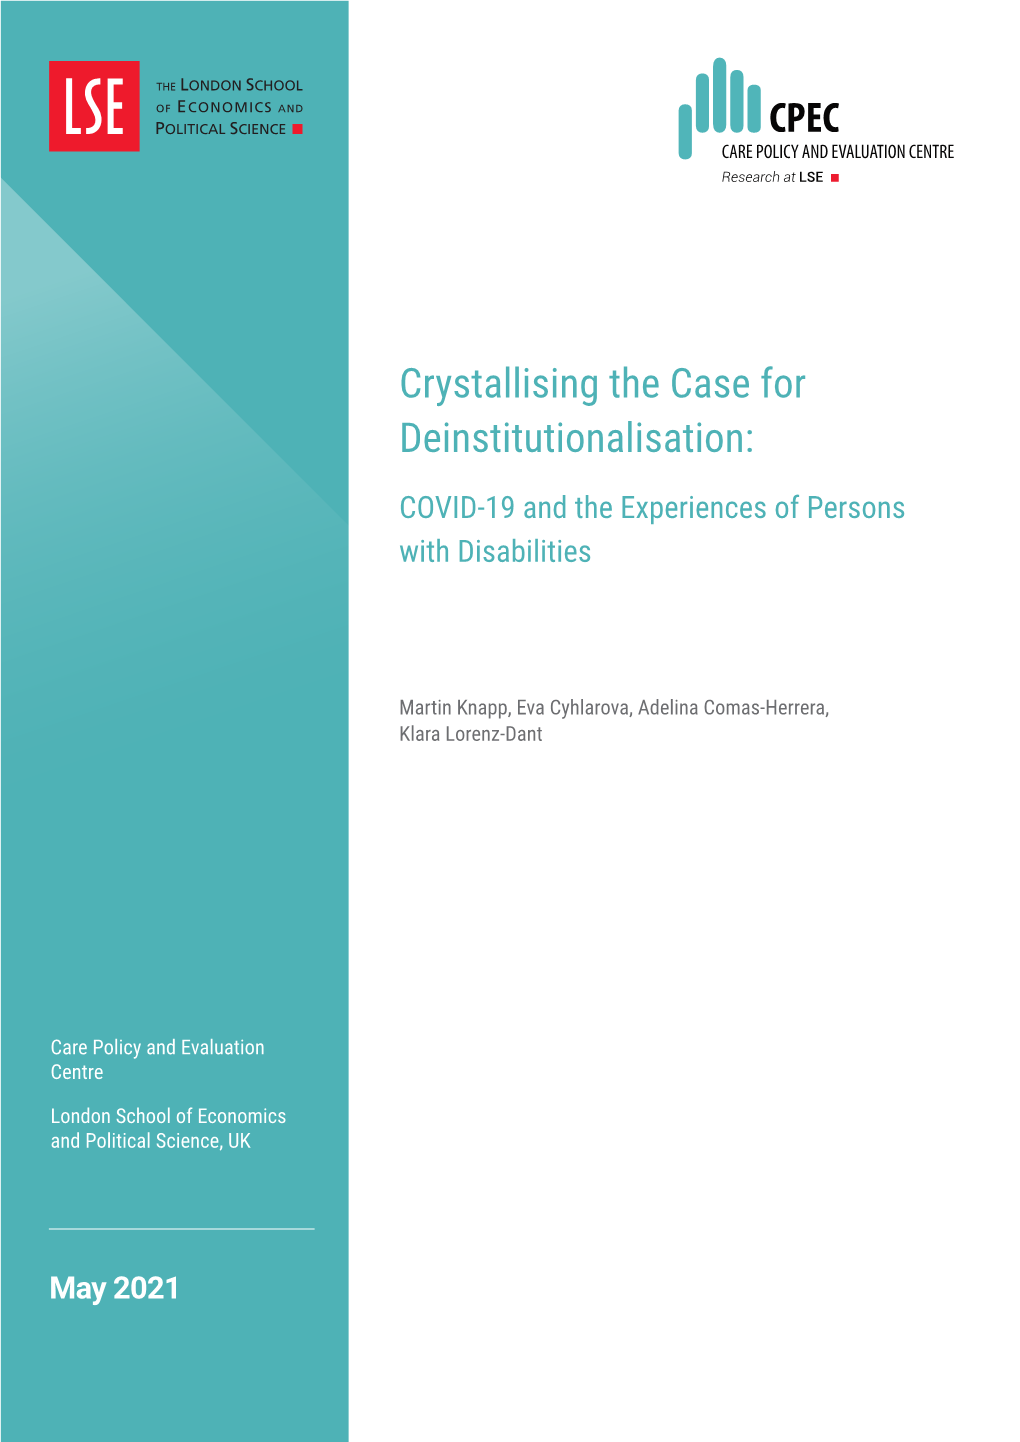 Crystallising the Case for Deinstitutionalisation: COVID-19 and the Experiences of Persons with Disabilities